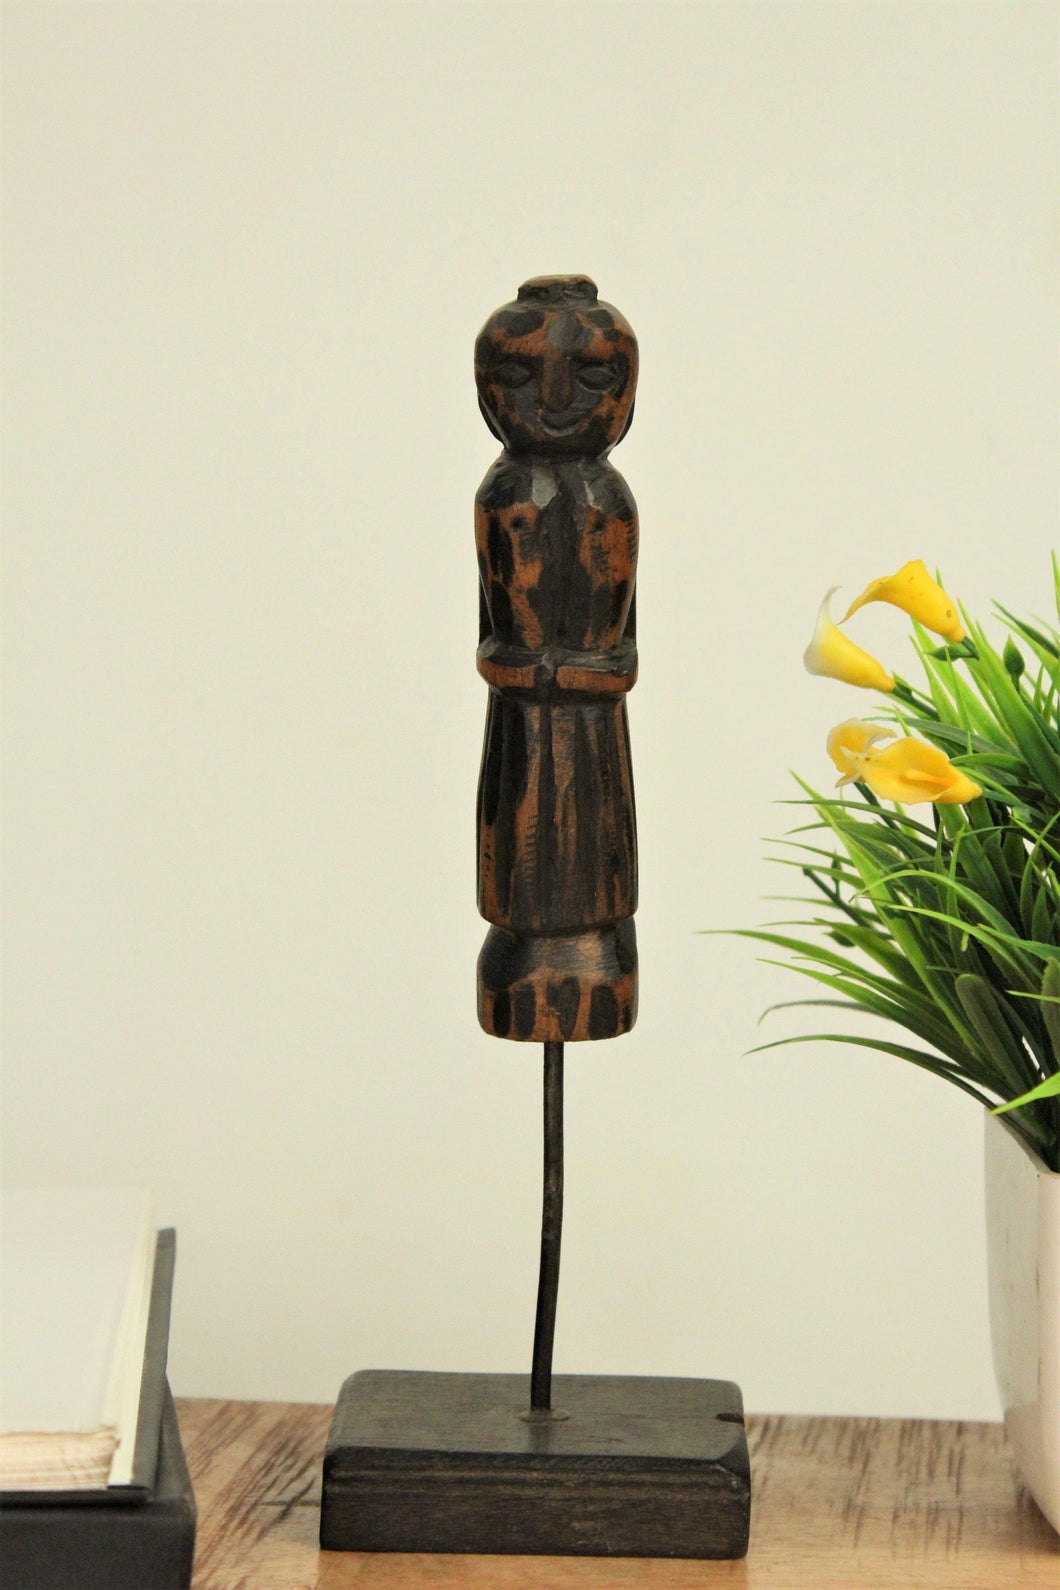 Antique Wooden Hand Carved Standee Showpiece for Table Decor. Size 9 x 6 x 26 cm - Style It by Hanika